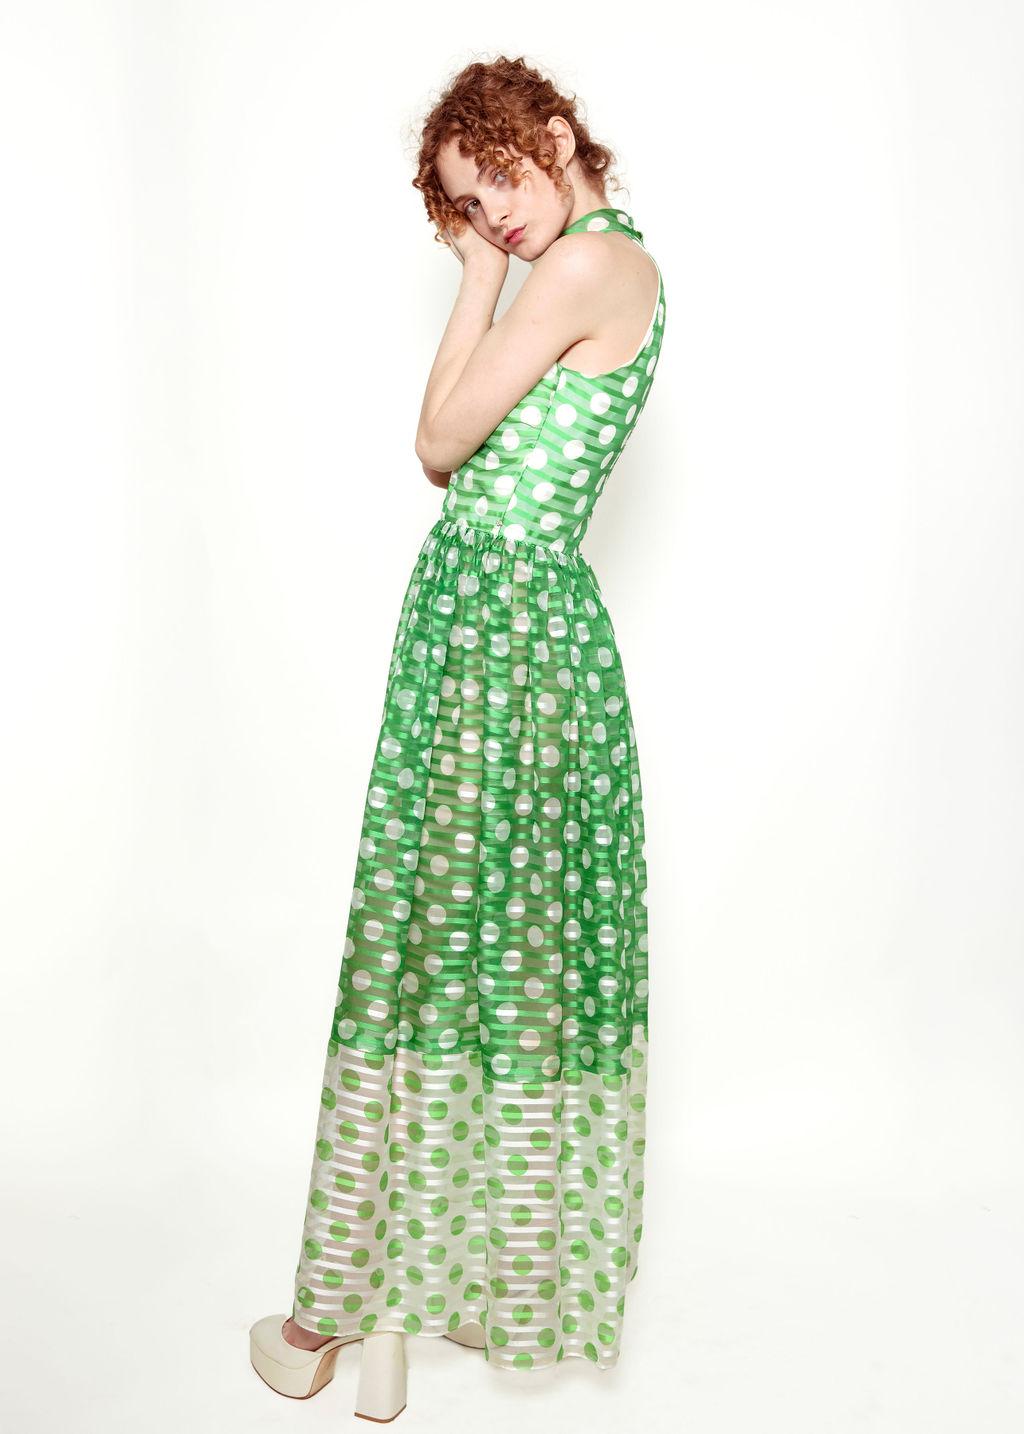  Light up the room with this beautifully vibrant Donald Brooks dress.

The dress has a fully lined bodice and a sheer skirt. With its playful mix of apple green with white polka dots, this dress will have you looking (and feeling!) oh so chic. There